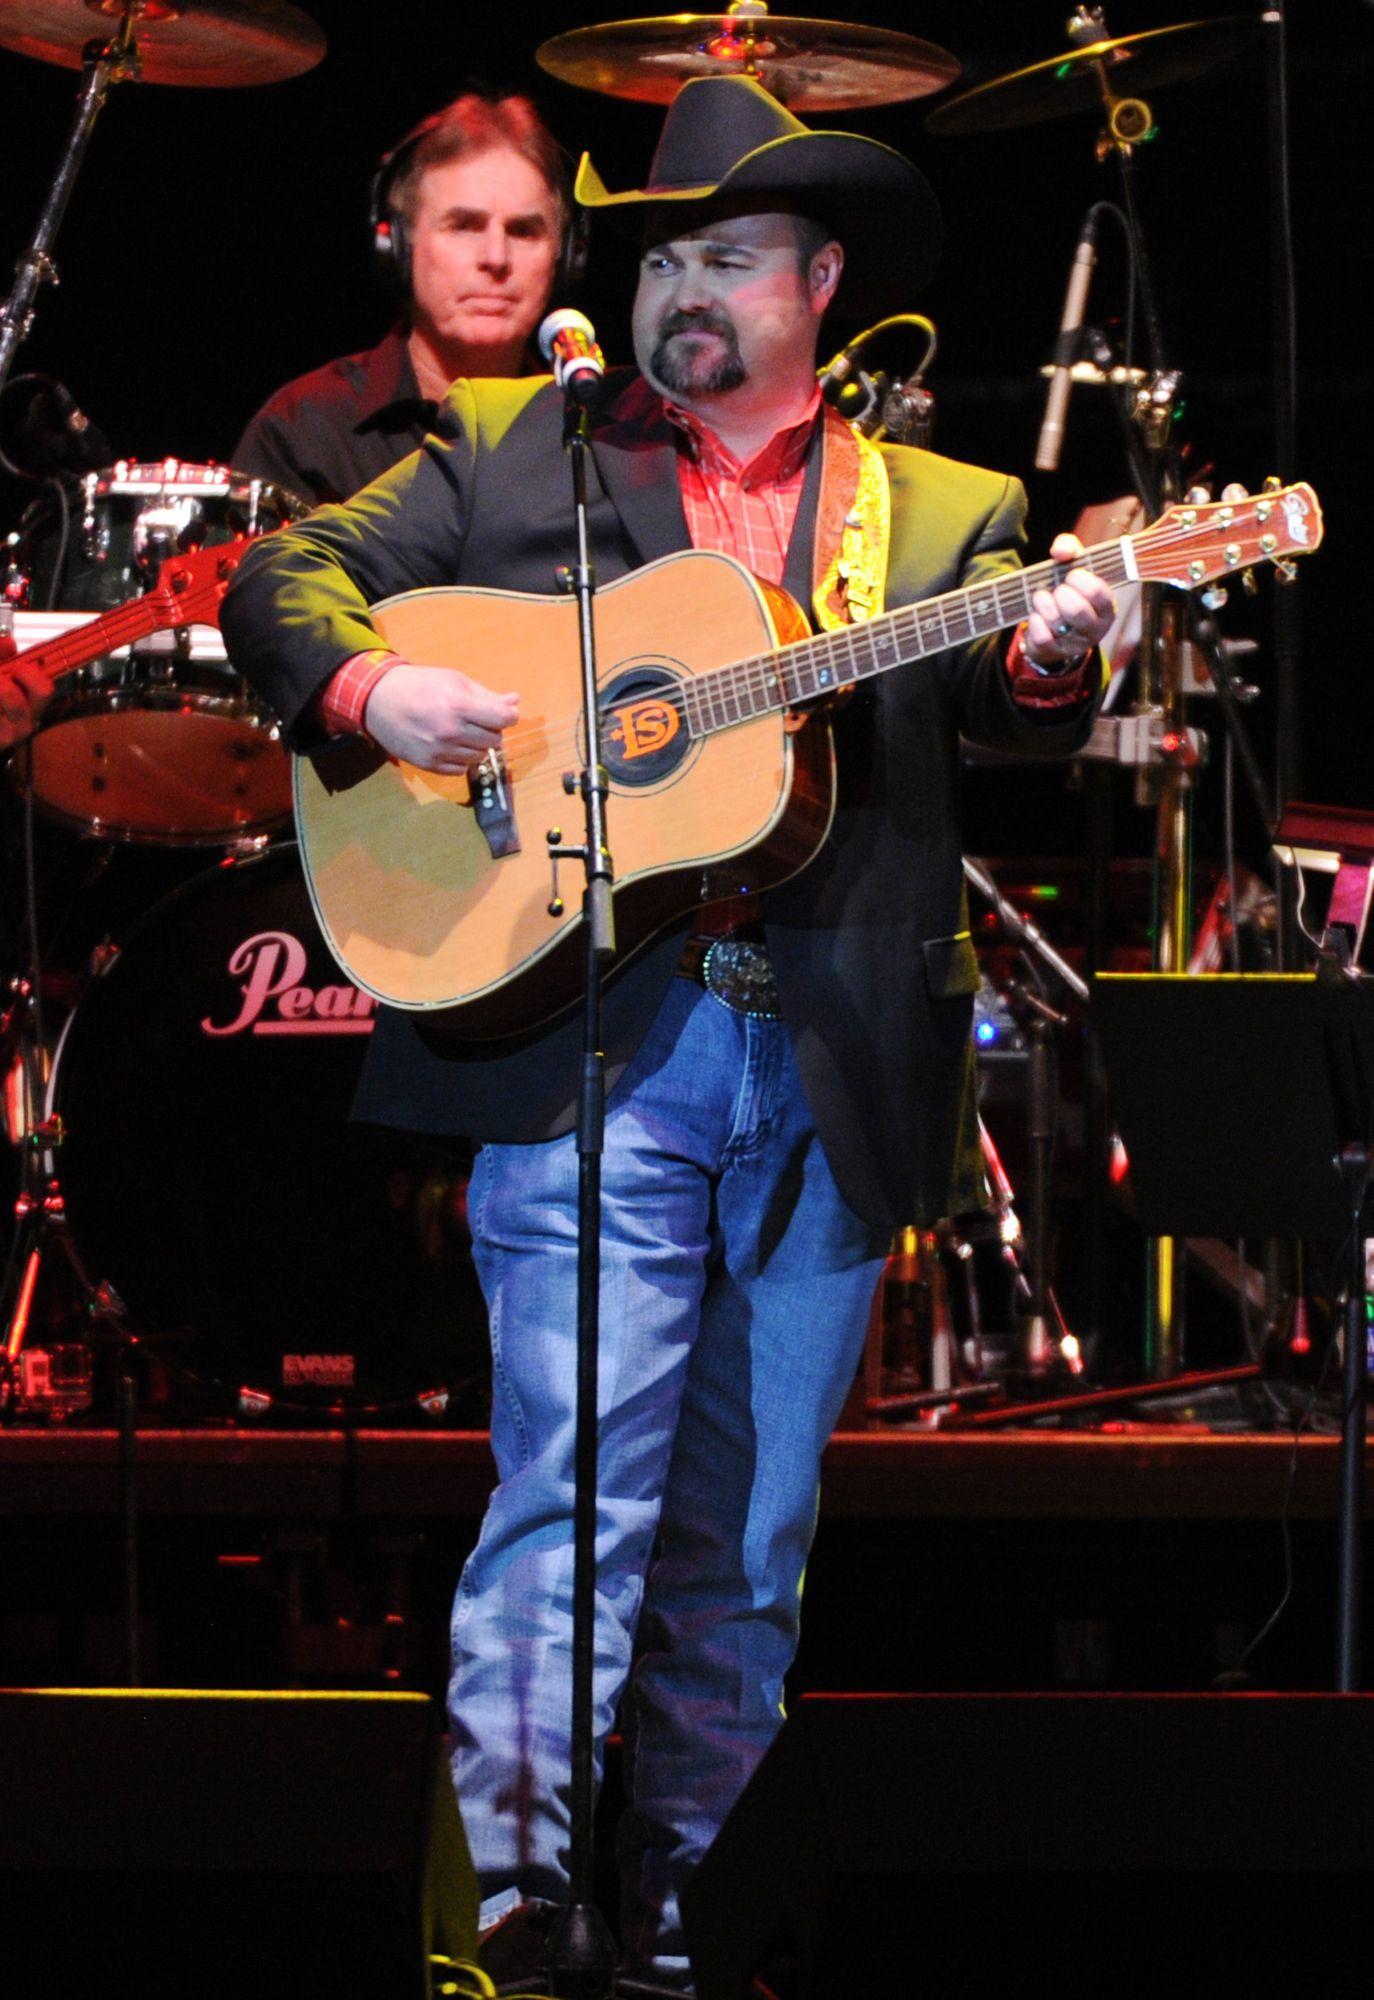 abc10.com. Country singer Daryle Singletary, known for '90s hit